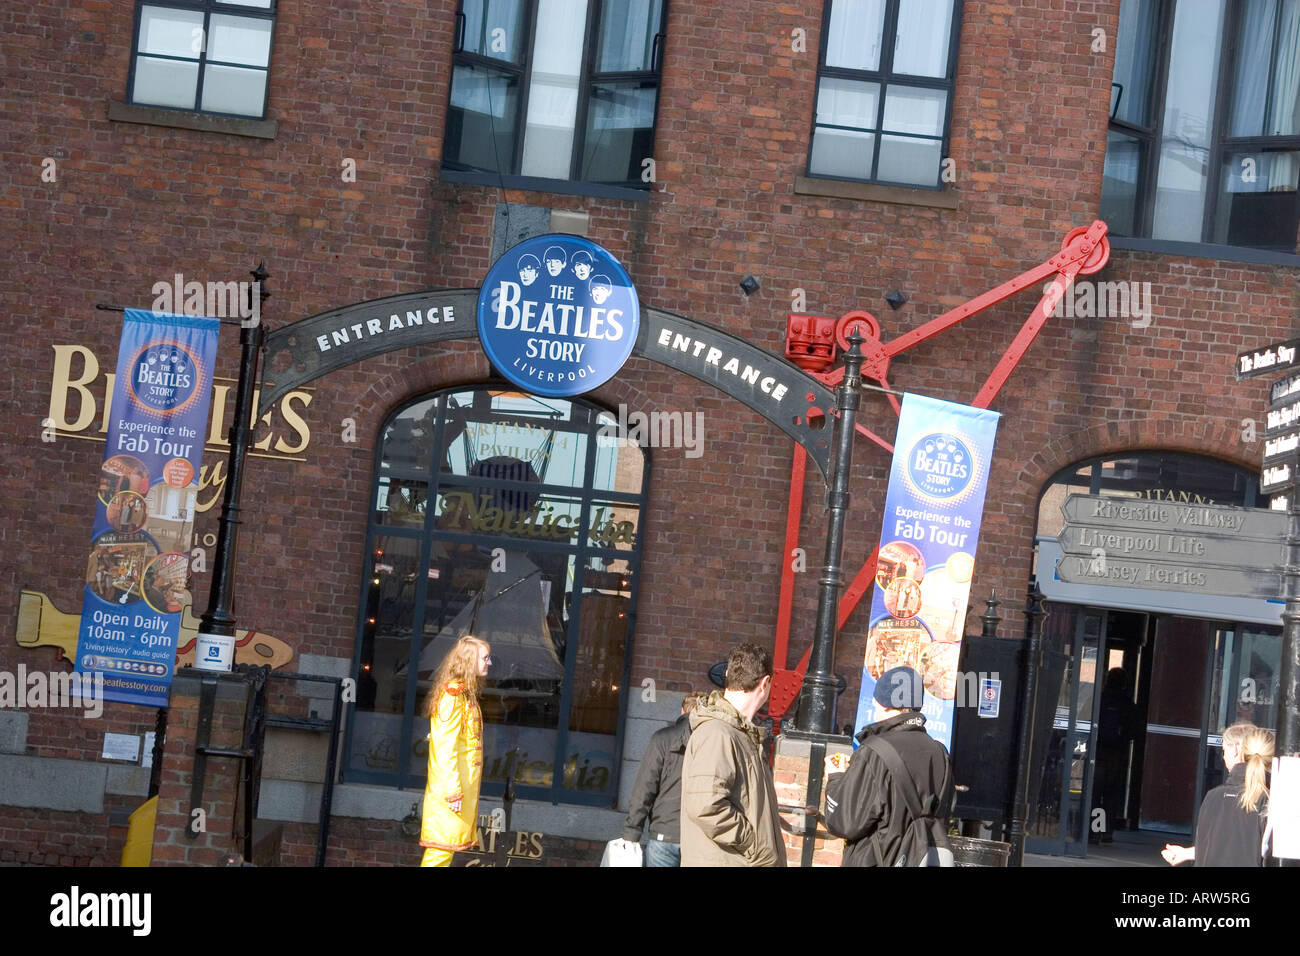 The Beatles Story Exhibition in Liverpool England Stock Photo